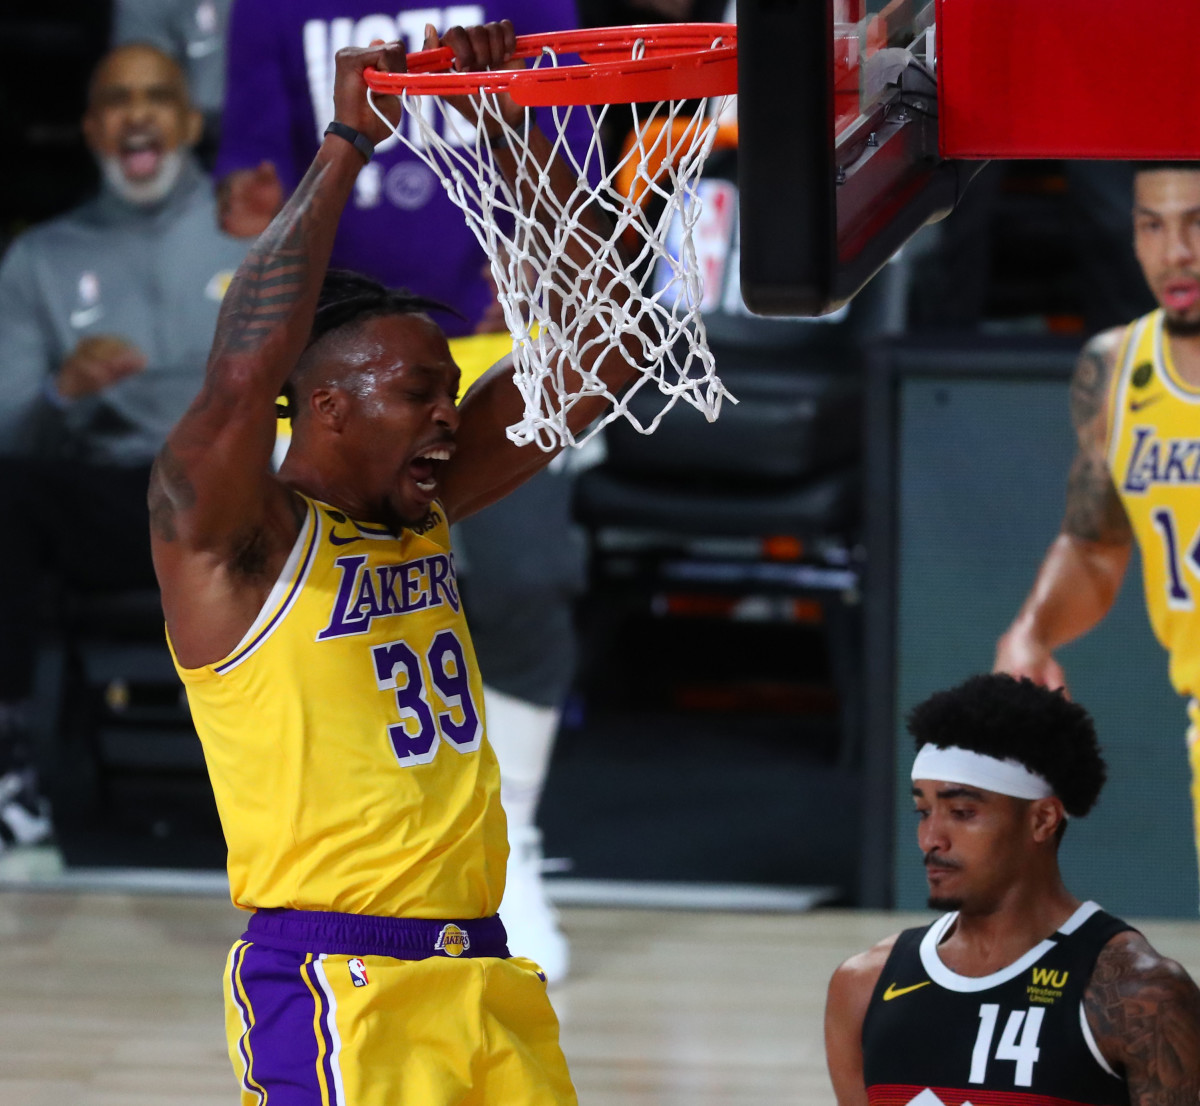 Los Angeles Lakers center Dwight Howard (39) dunks the ball against the Denver Nuggets during the first half in game four of the Western Conference Finals of the 2020 NBA Playoffs